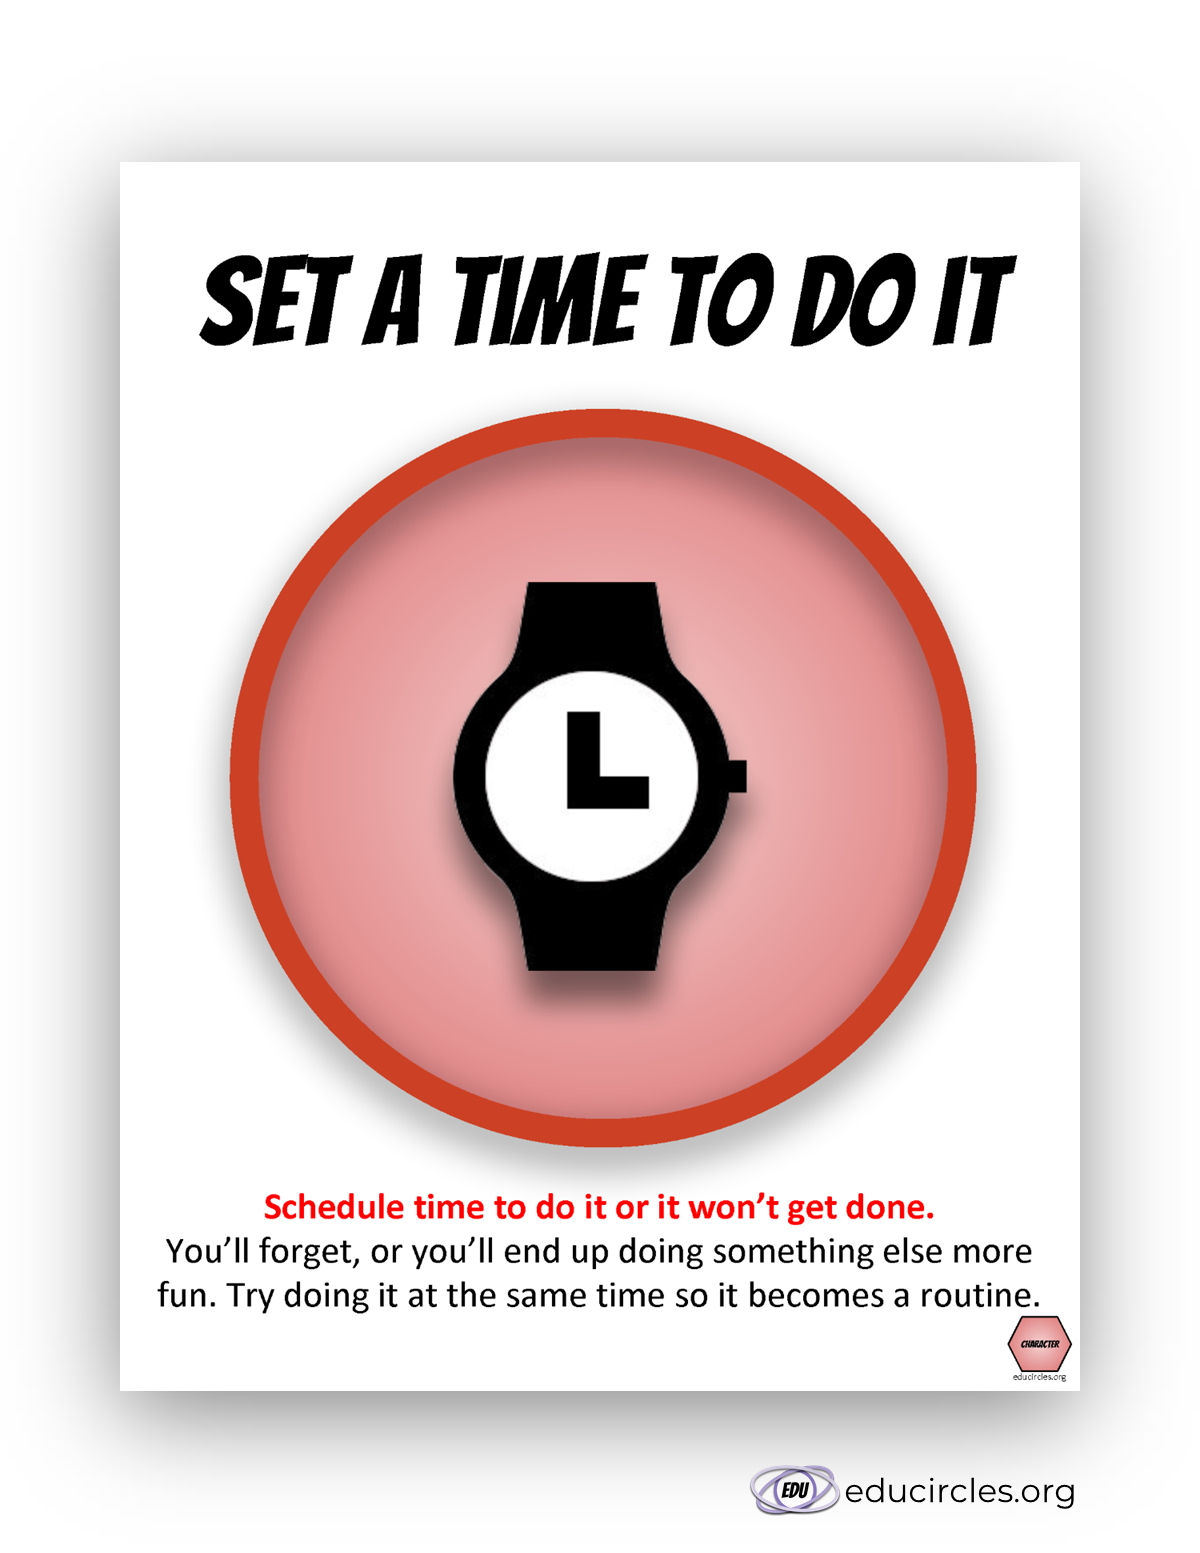 FREE Growth Mindset Poster PDF slide 7 - strategy: set a time to do it